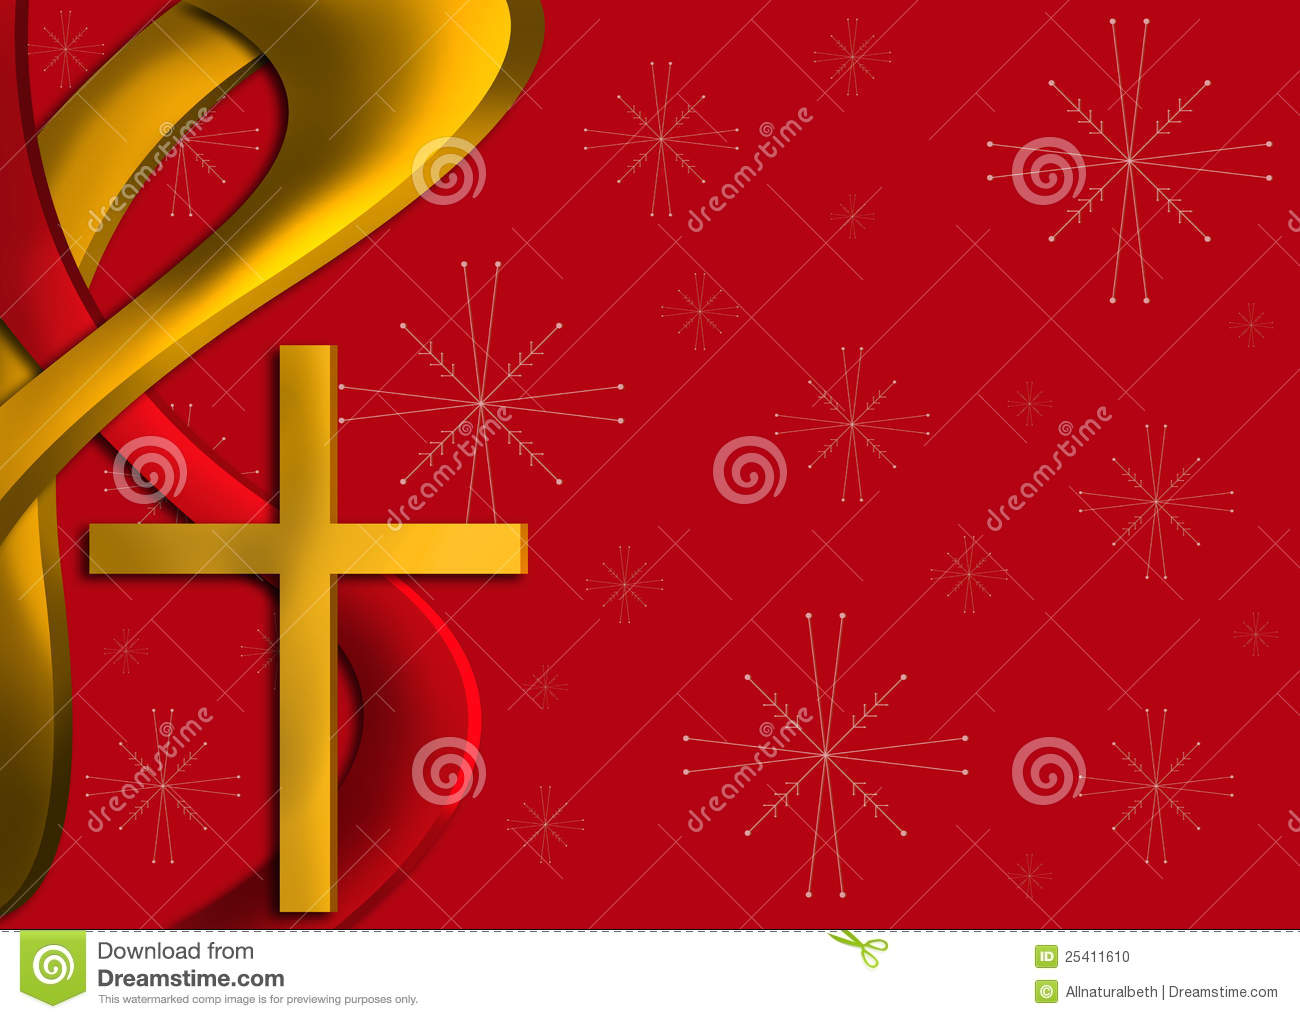 Religious Christmas Background With A Cross And Snowflakes Mr No Pr No